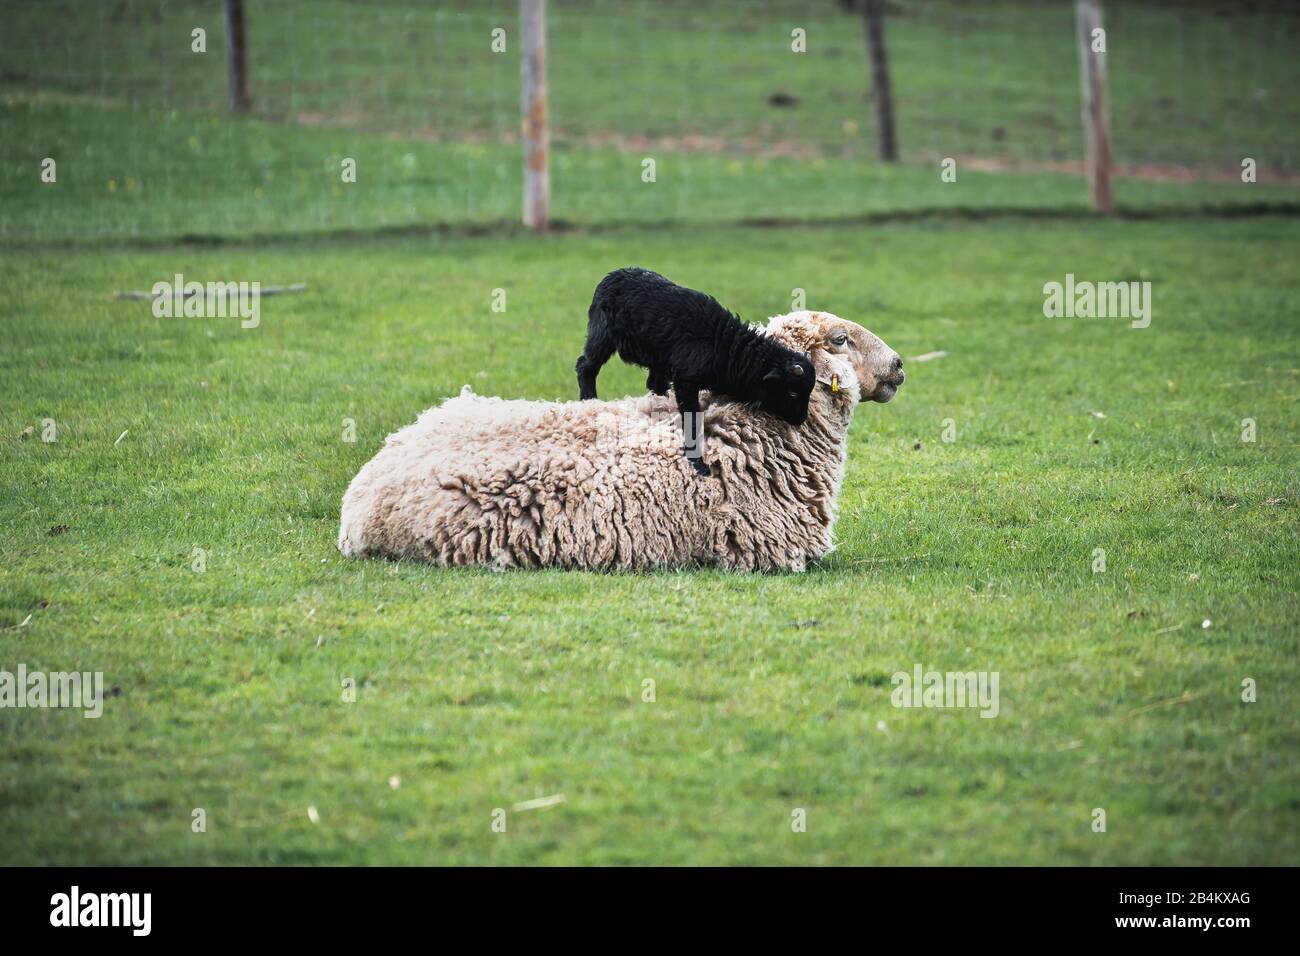 Black lamb stands on white wool sheep Stock Photo